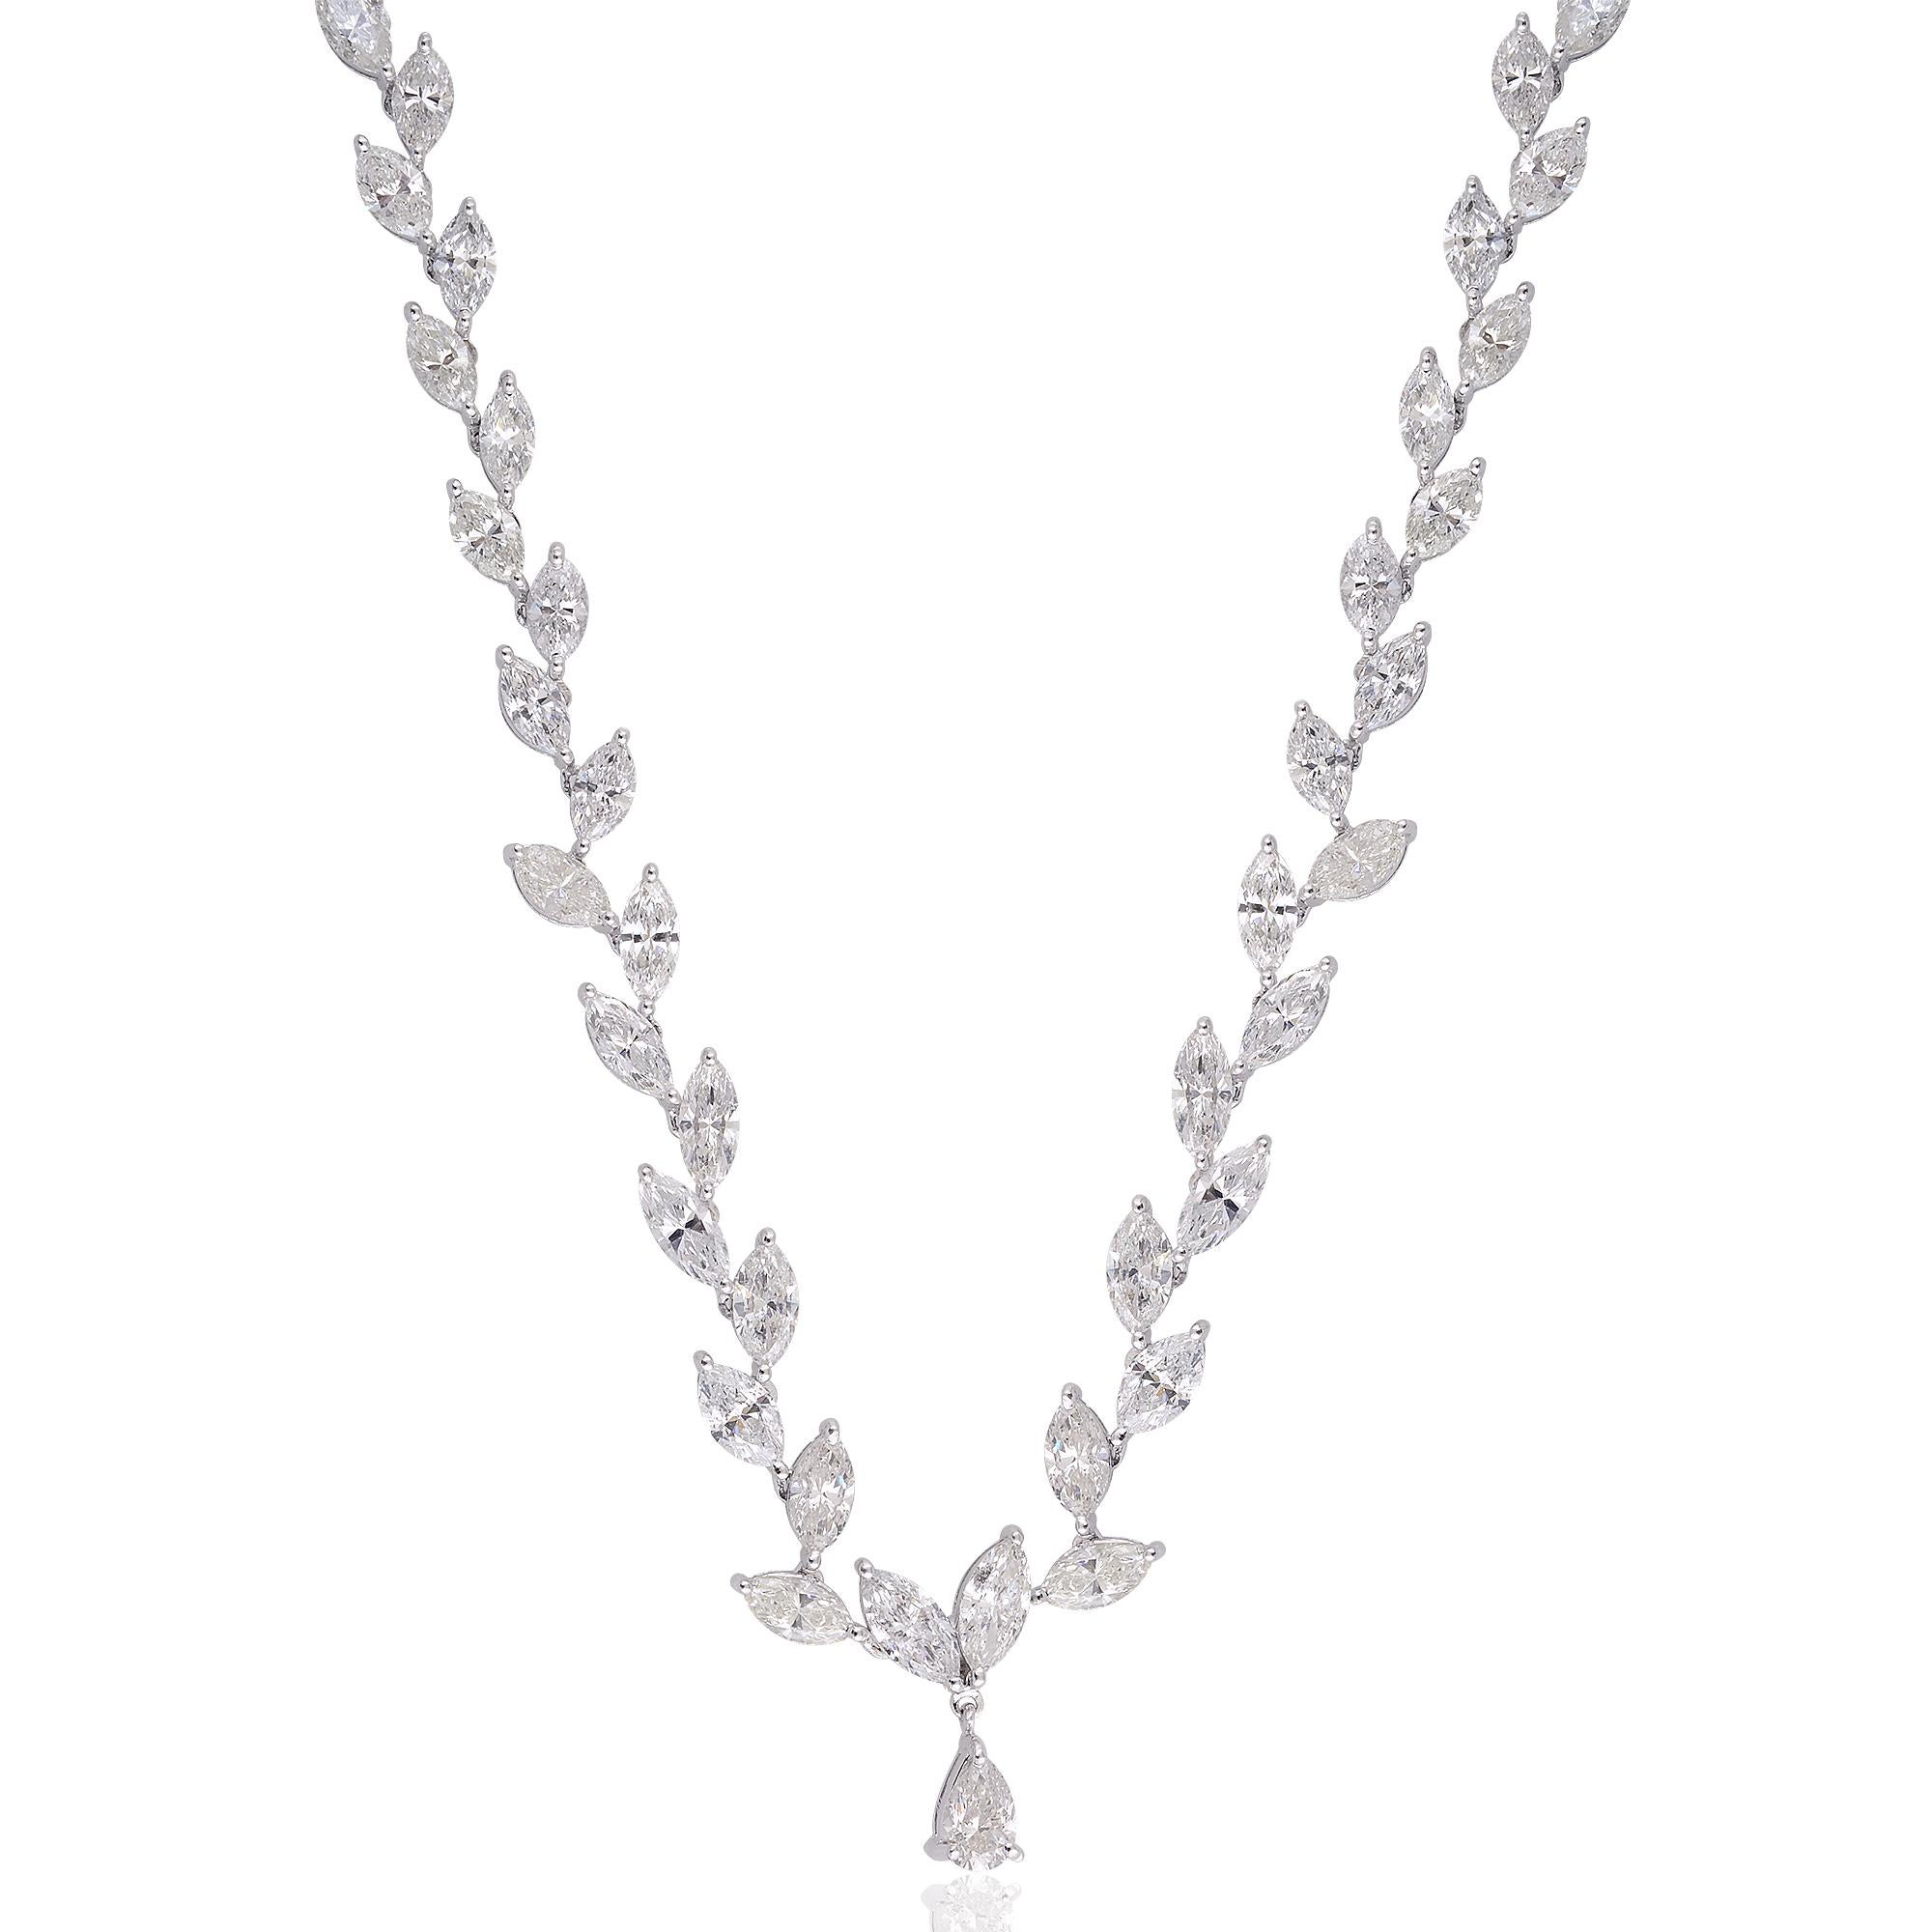 The length of the necklace is designed to rest gracefully on the neckline, accentuating the collarbone and adding a touch of sophistication to any attire. The secure clasp ensures a comfortable and secure fit, allowing you to wear this necklace with